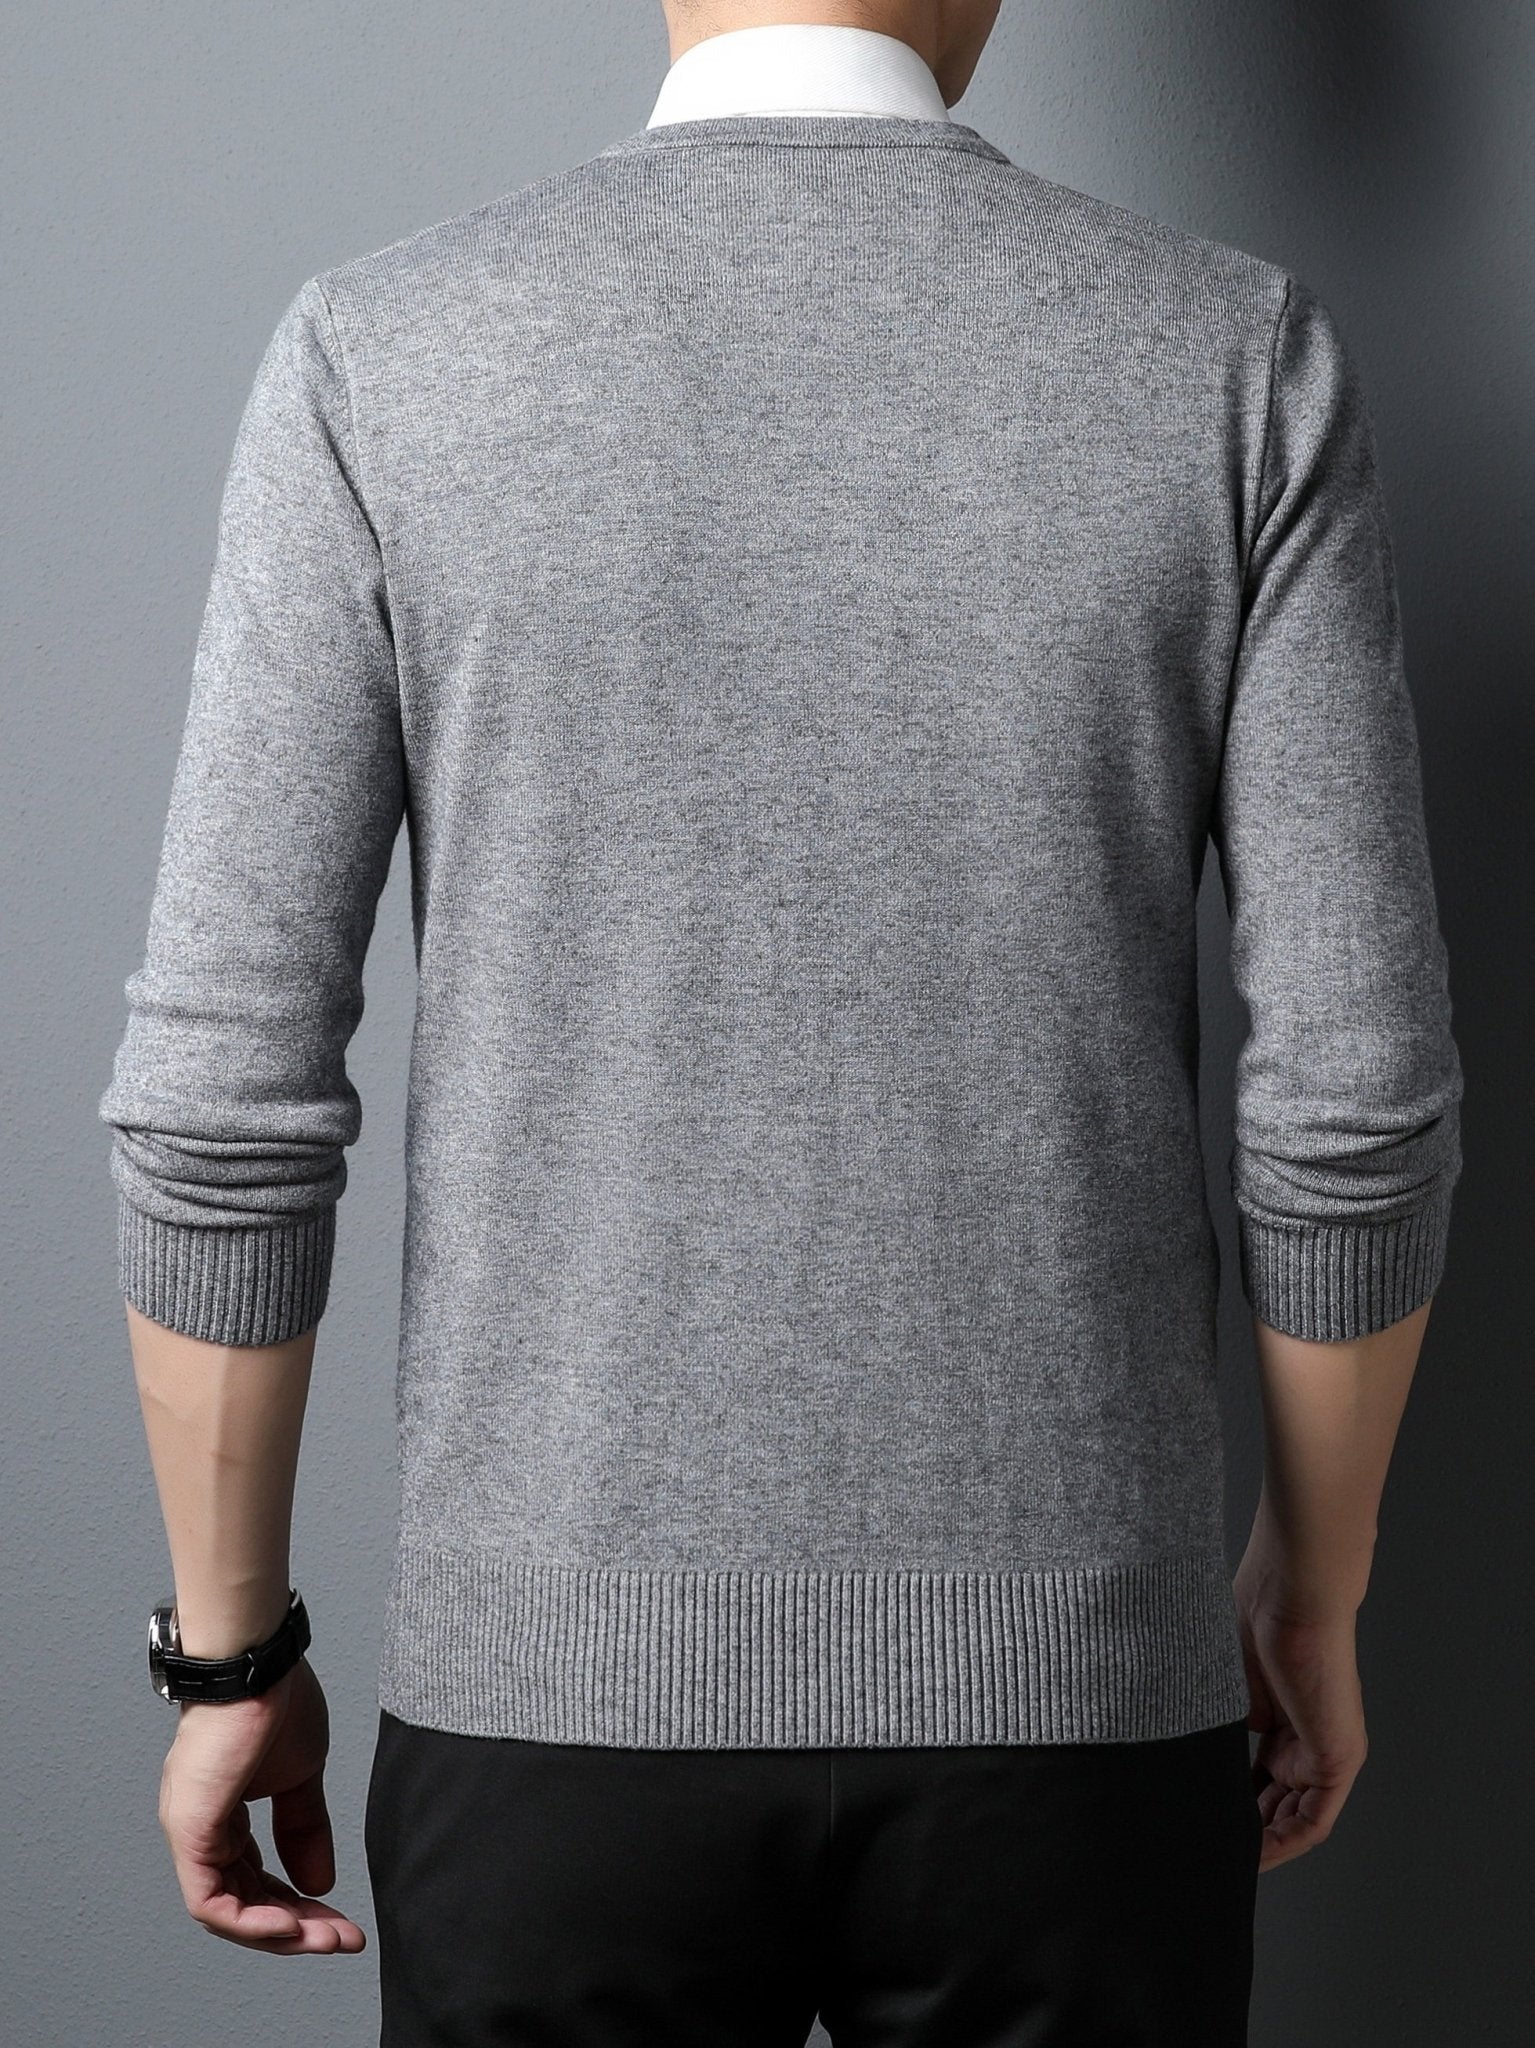 2024 Autumn Fashion: Men's Knitted V - neck Sweater - CasualFlowshop